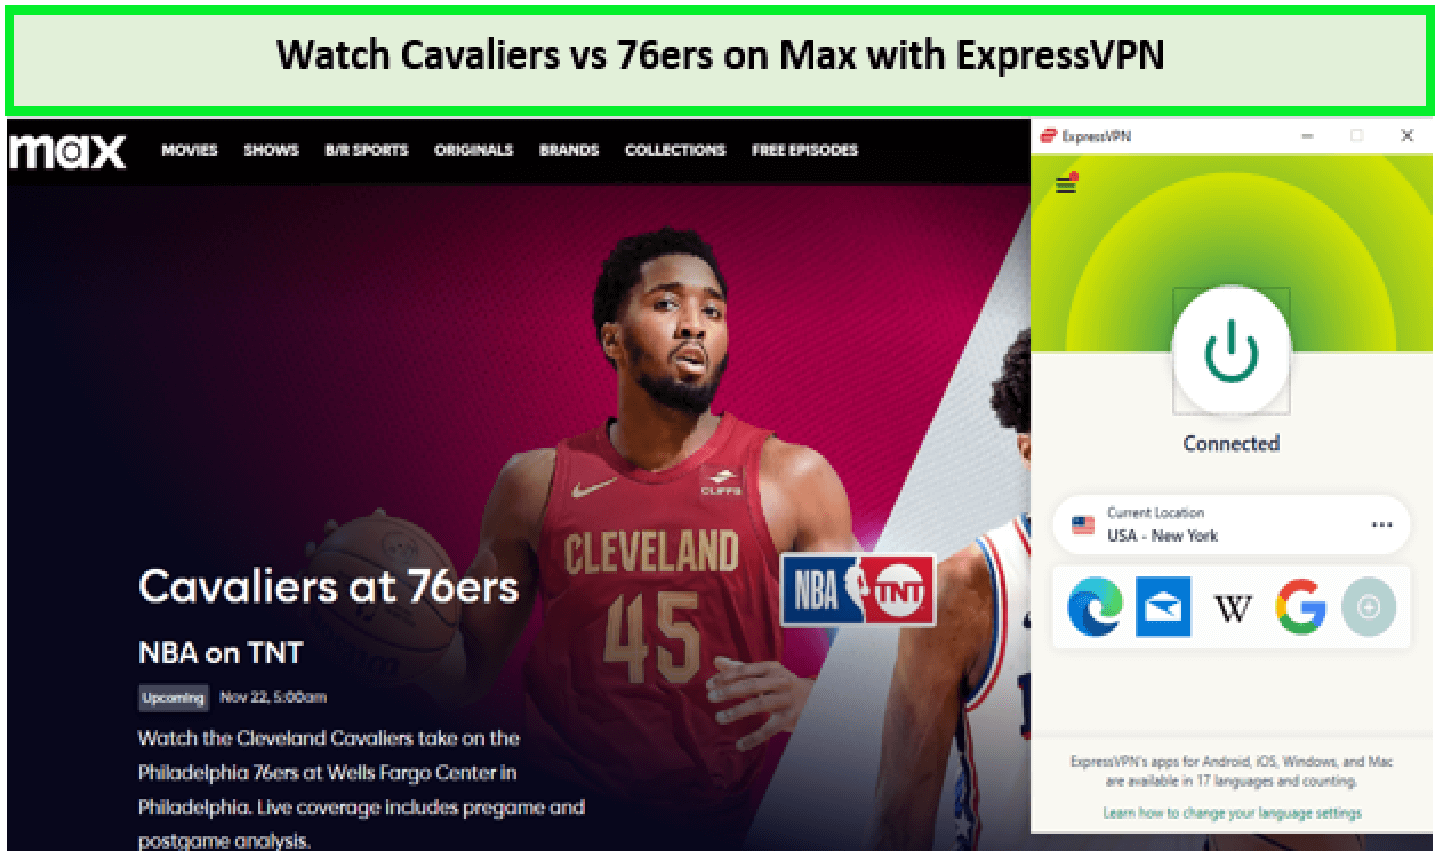 Watch-Cavaliers-vs-76ers-in-Netherlands-on-Max-with-ExpressVPN